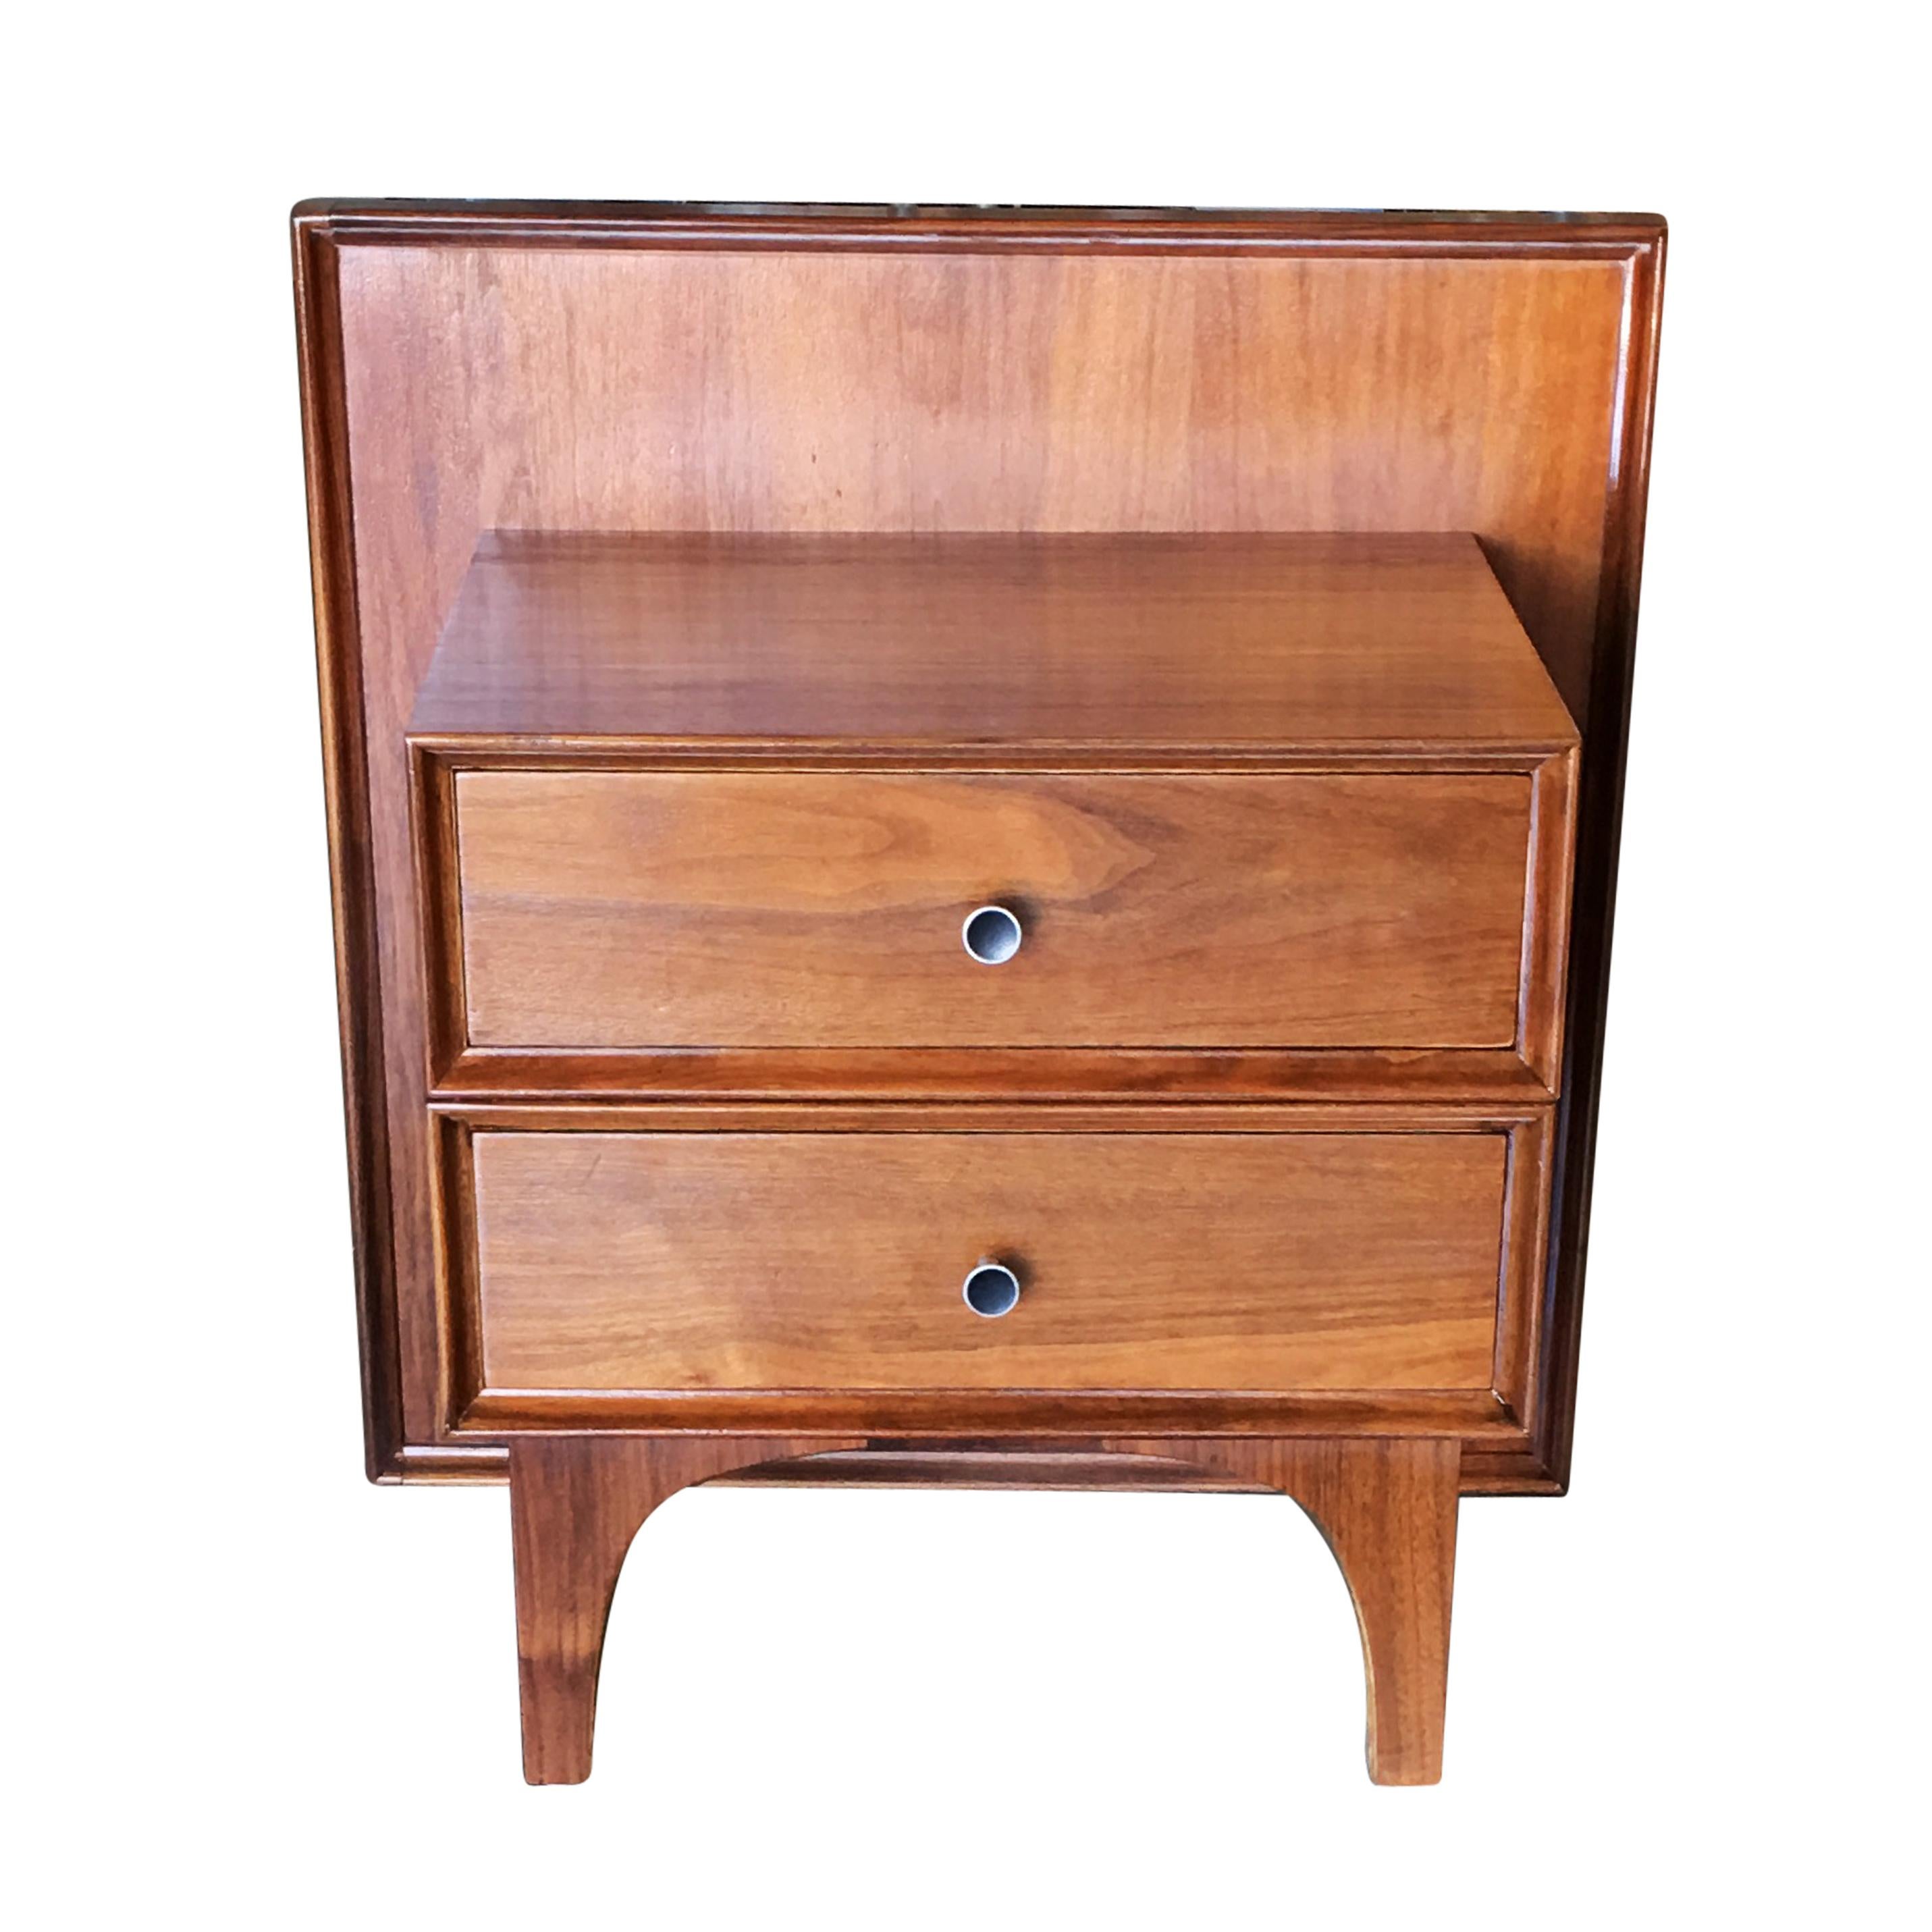 Custom Mid Century Modern nightstand designed and made by Glenn of California in walnut. Includes a two-drawer dresser with a large wood back plate for wall installation.